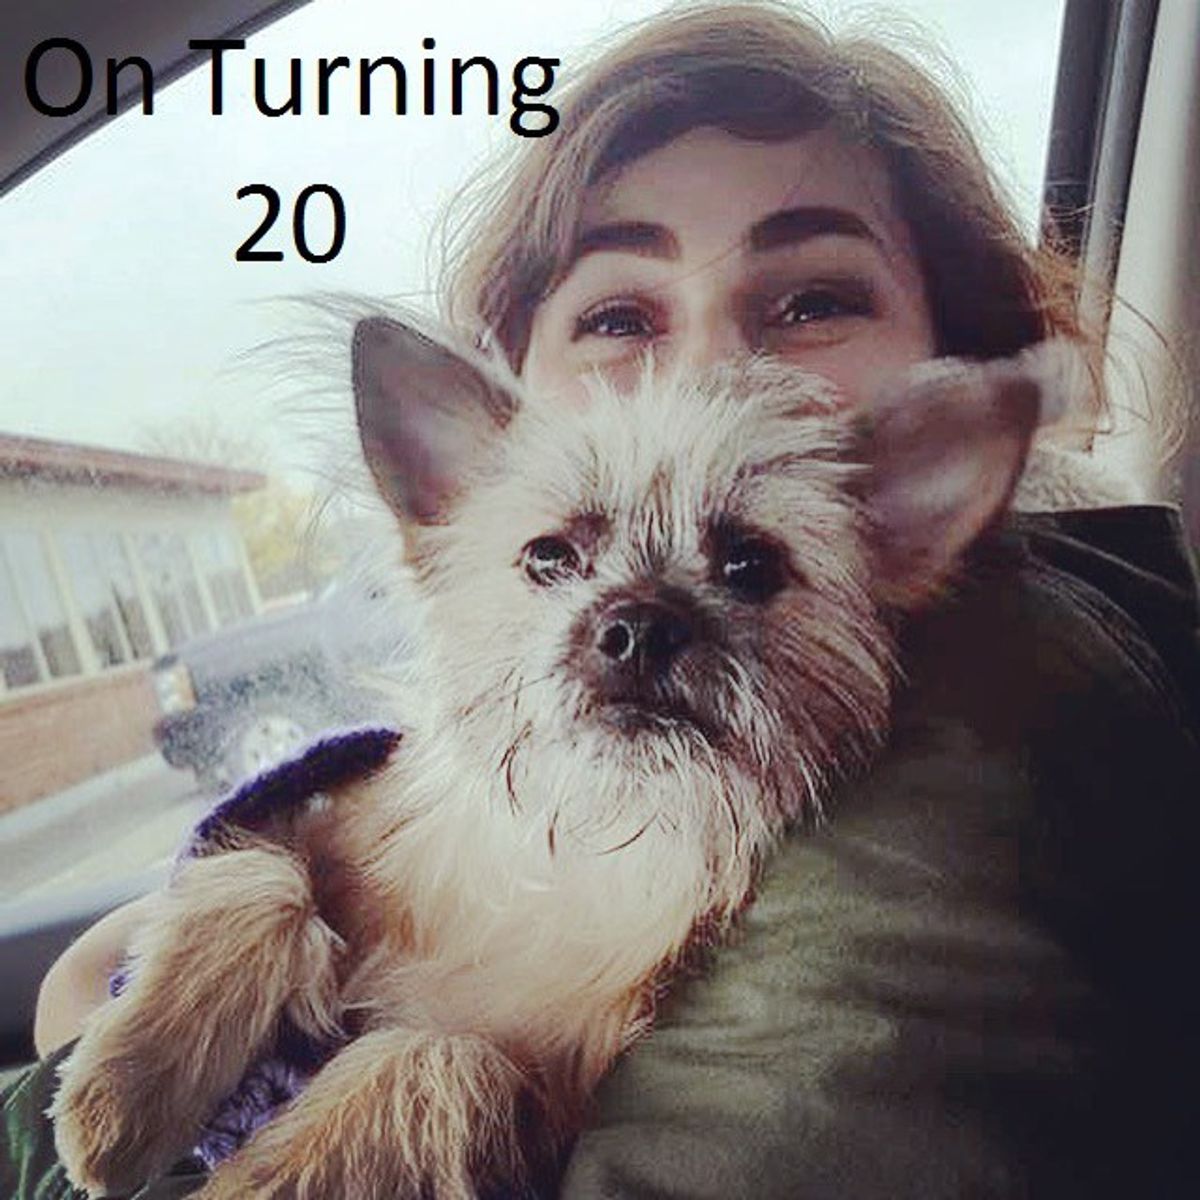 Watch: Thoughts On Turning 20